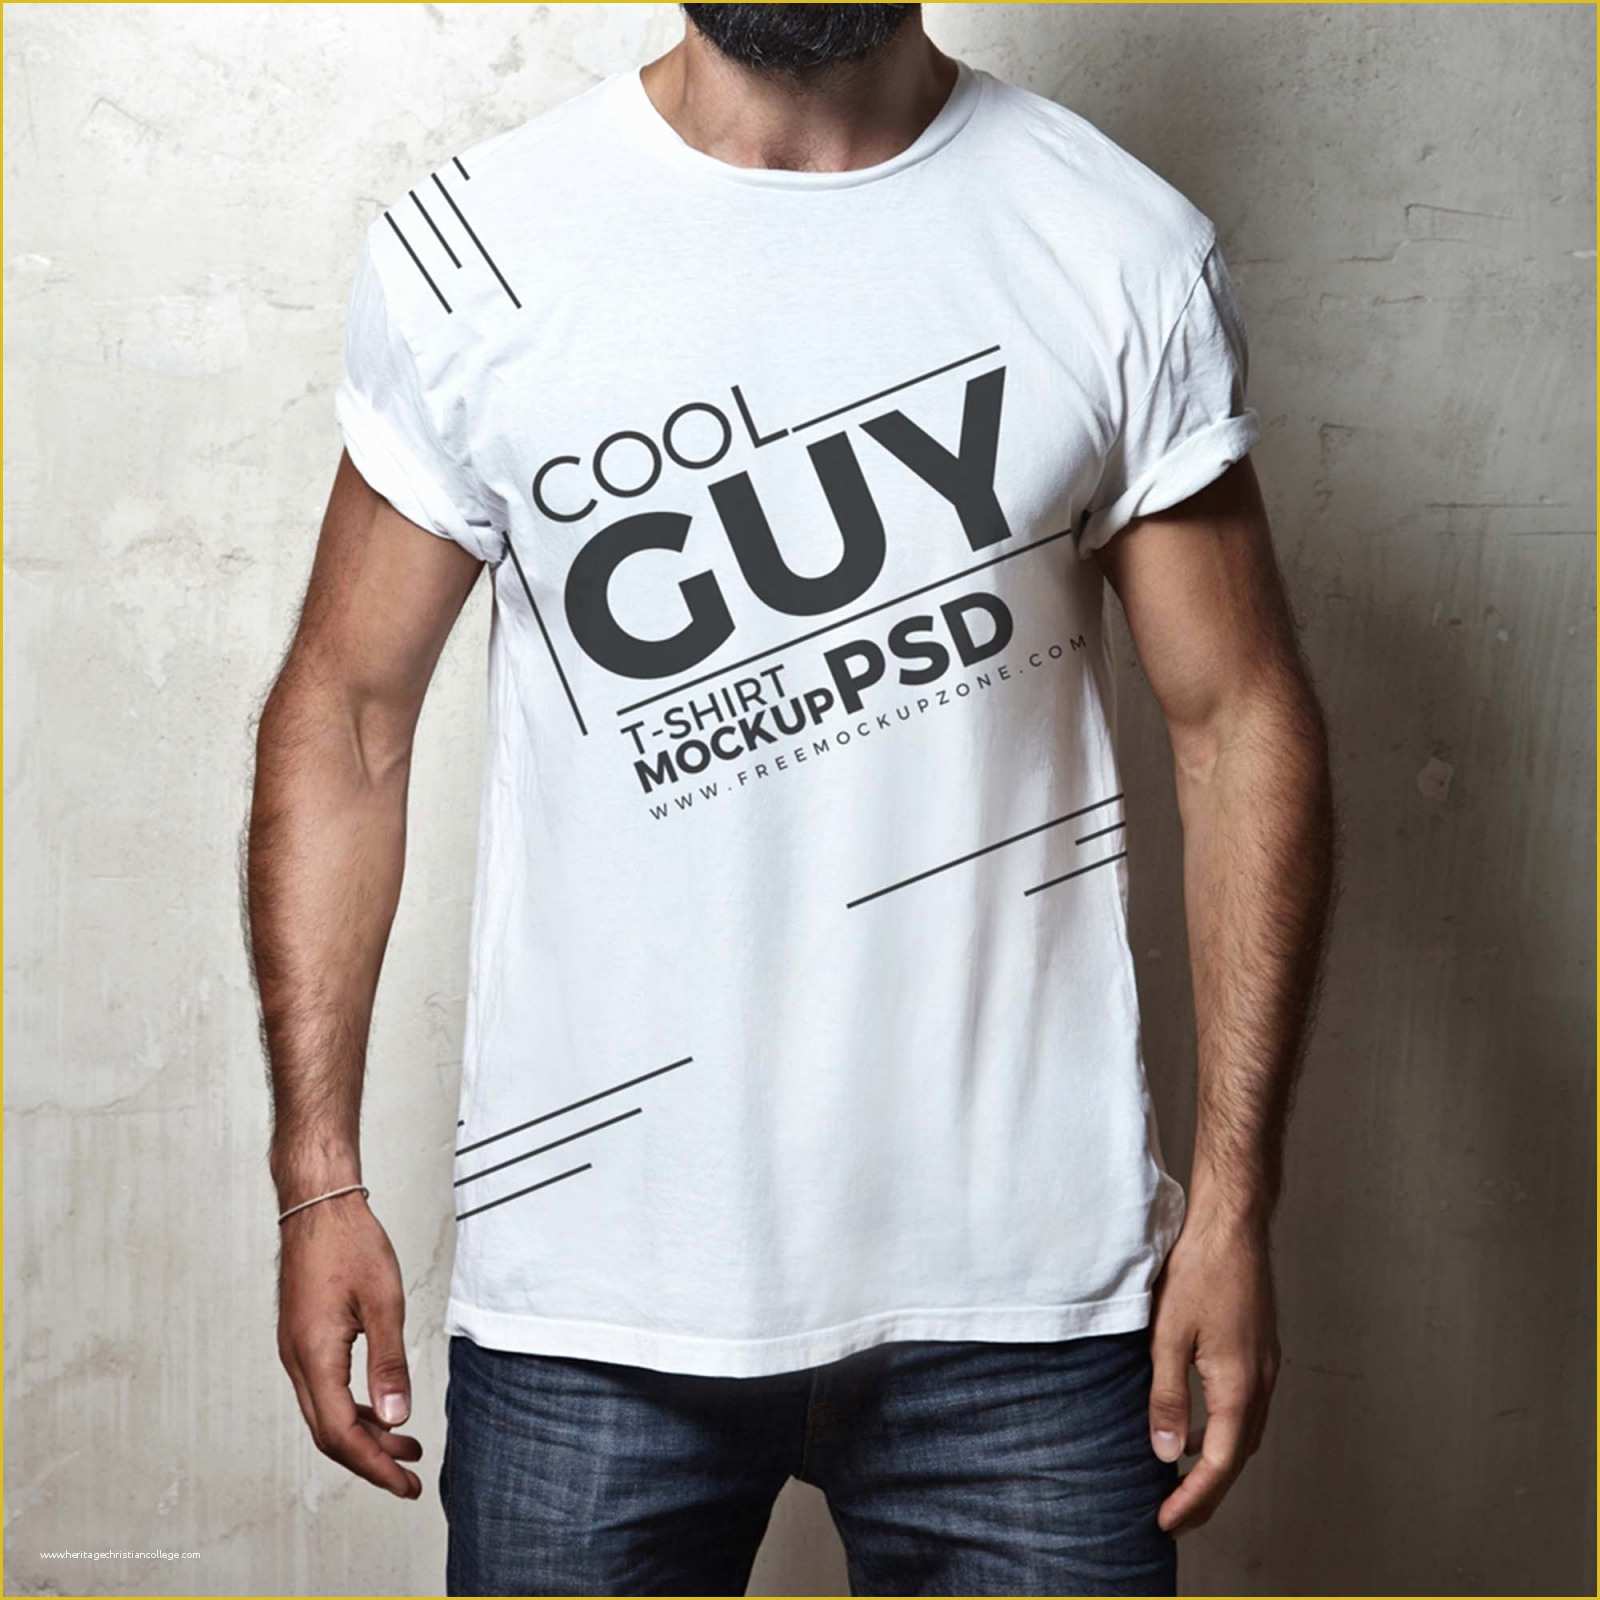 T Shirt Mockup Template Free Download Of Male T Shirt Mockup Available In Psd Download for Free